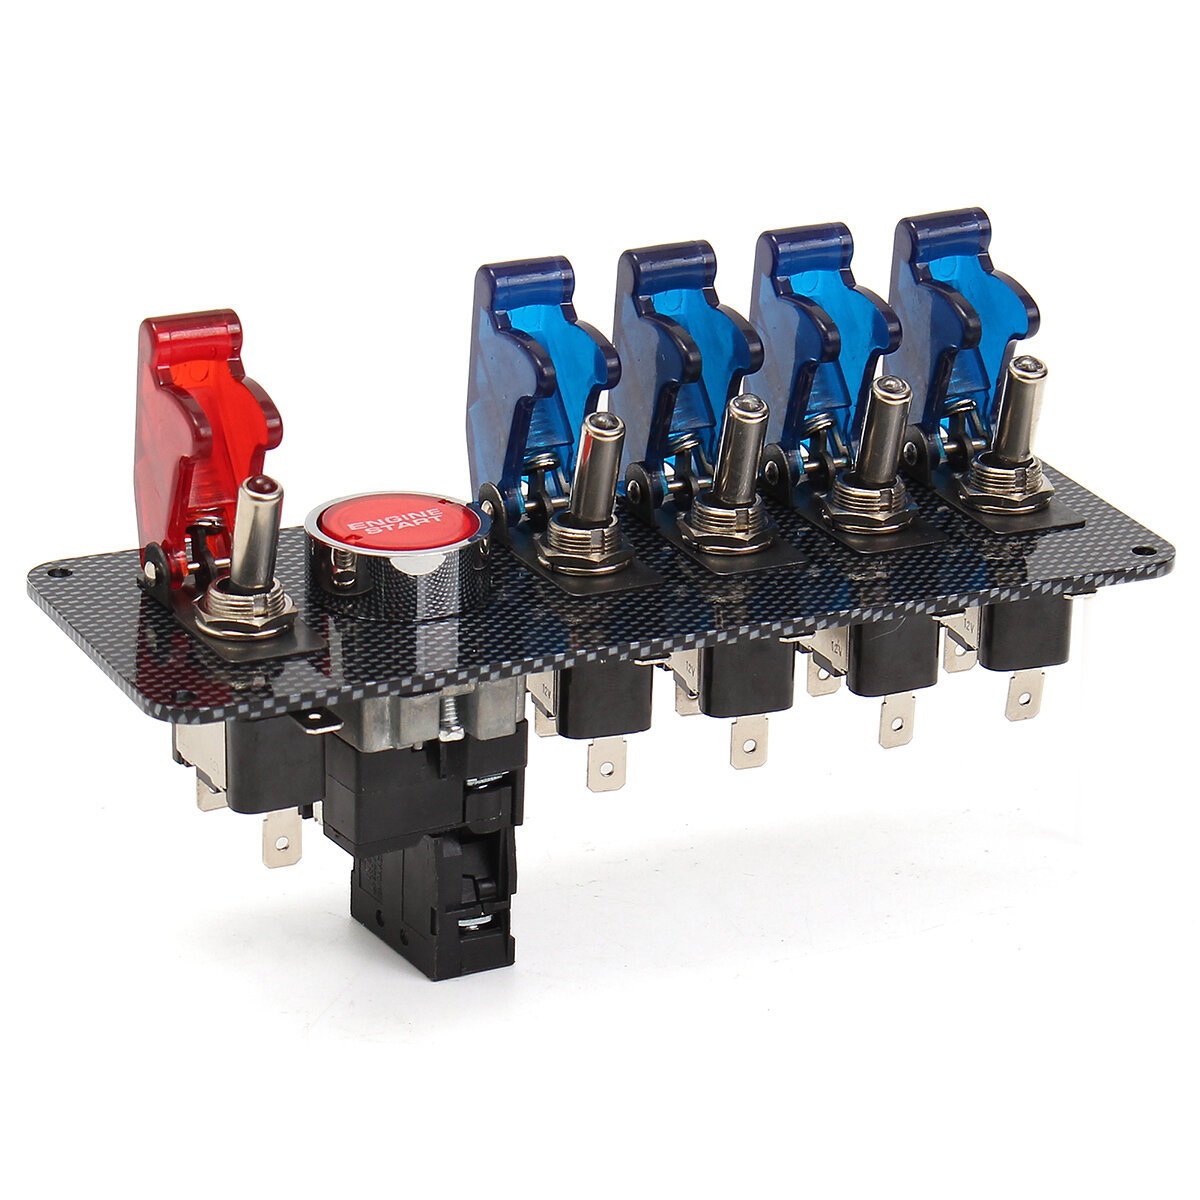 12V Racing Car Ignition Switch Panel with 4 Blue+1 Red LED Toggle Switch Button